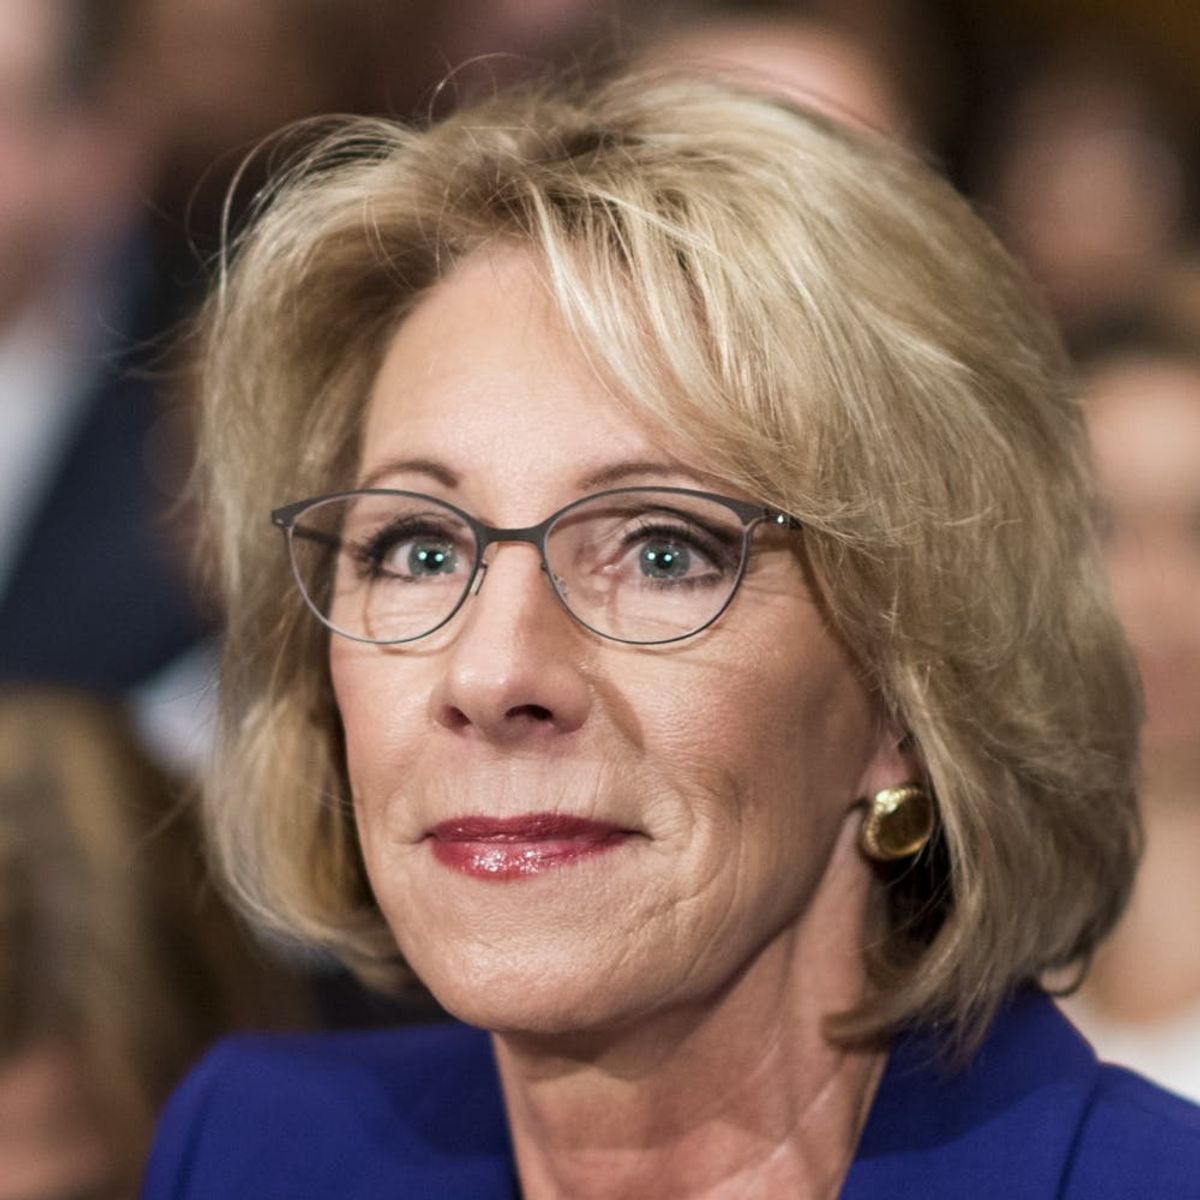 Here’s Why 18 States and Washington DC Are Suing Betsy DeVos Over Student Loan Protections